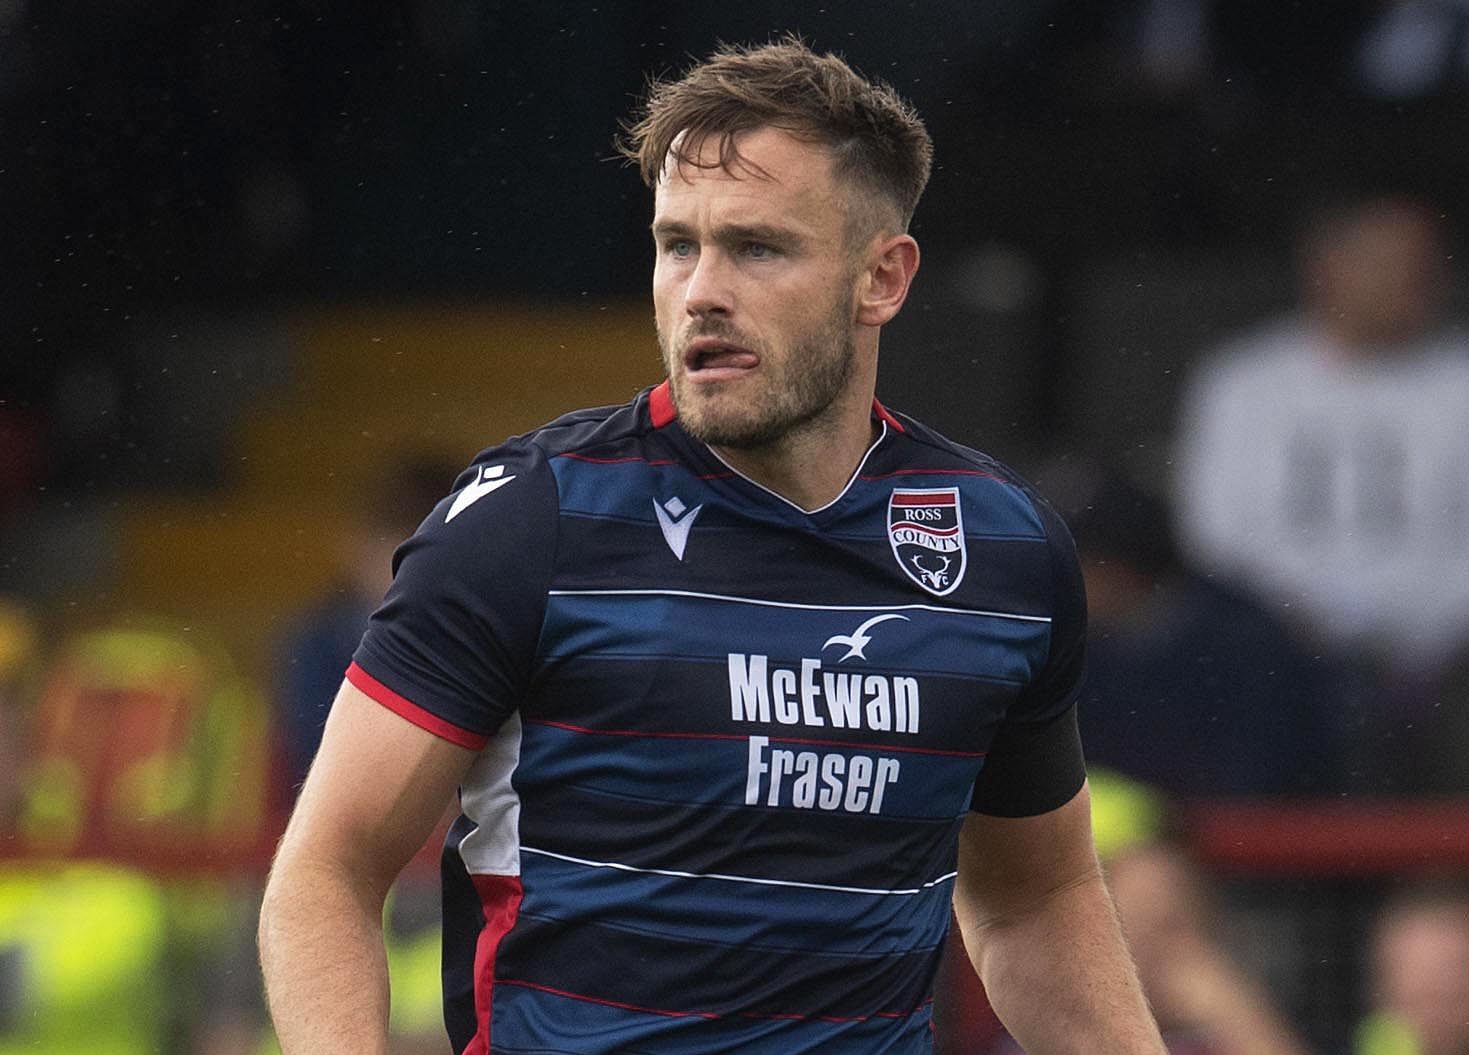 Keith Watson in action for Ross County.